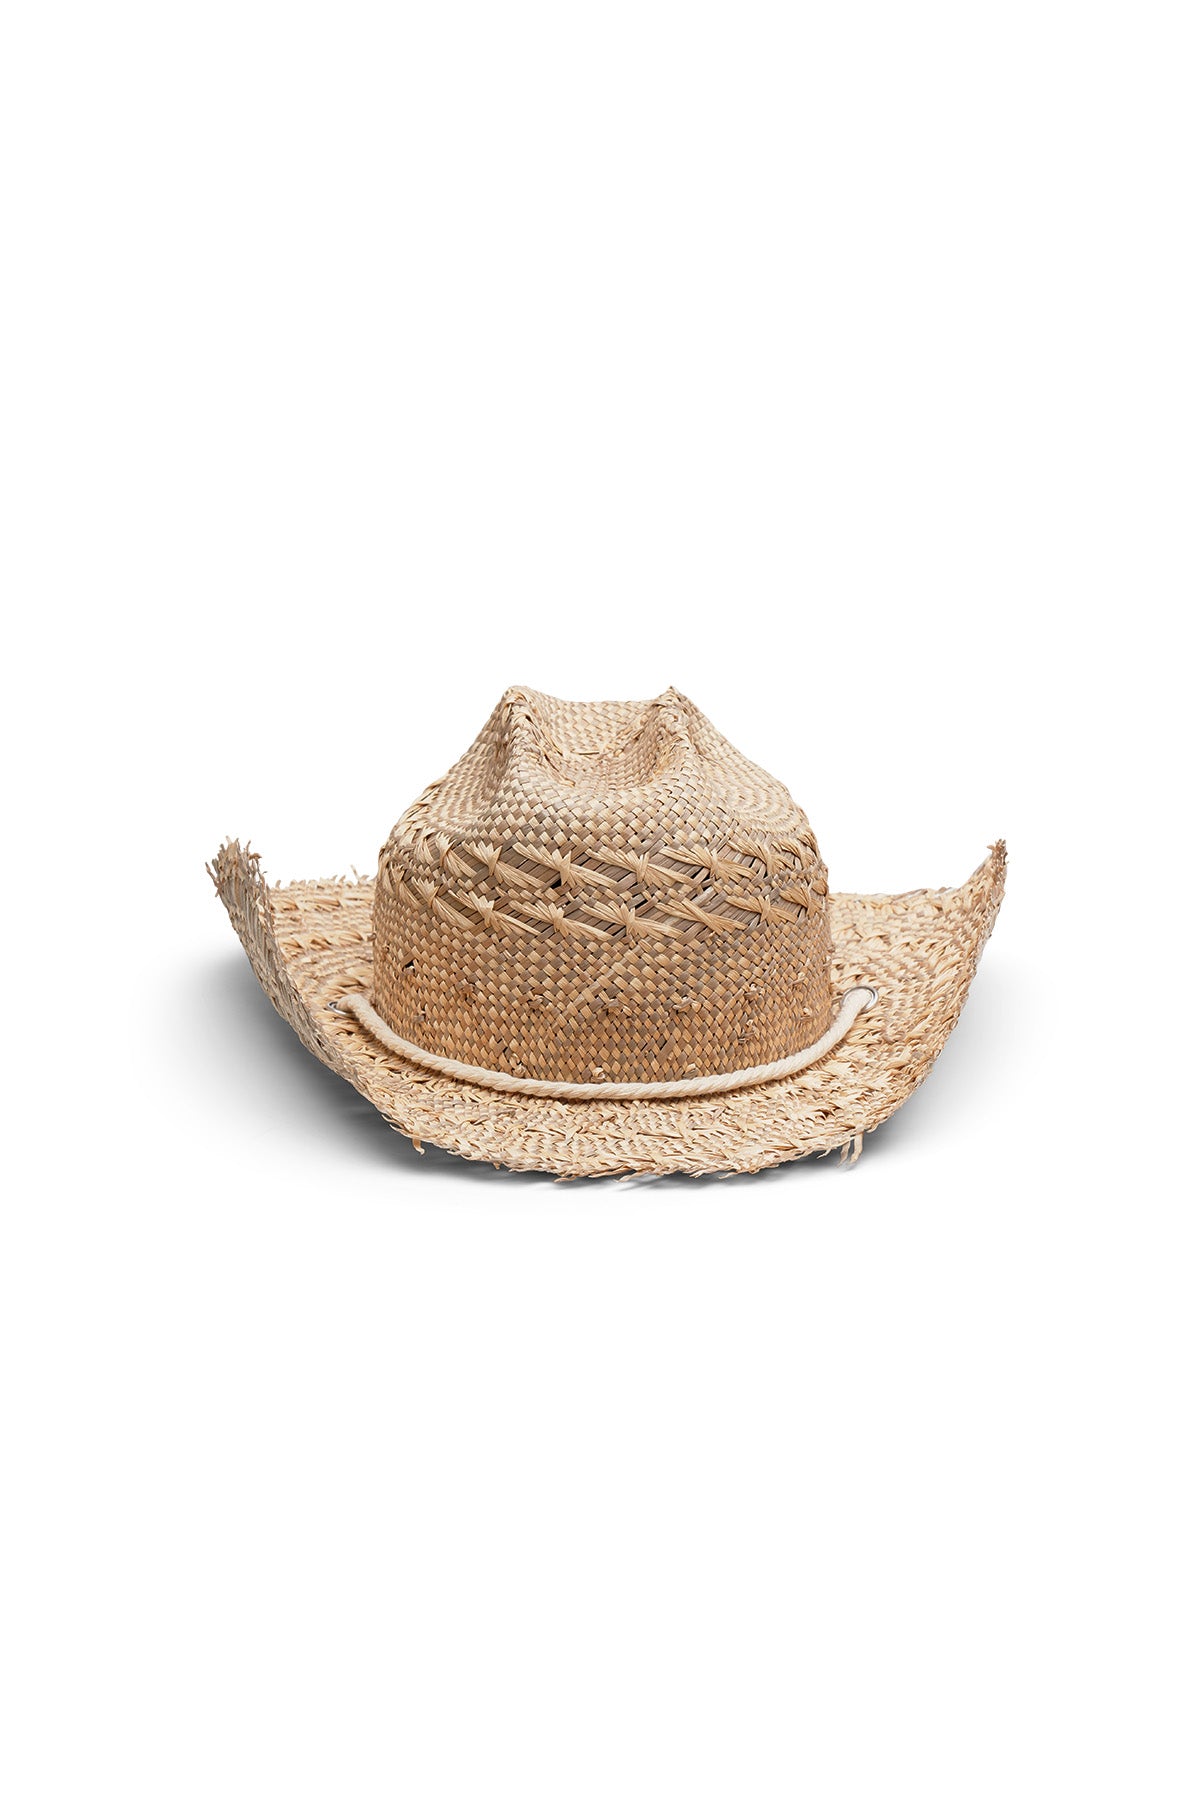 Natural beige straw cowboy hat with a wide frayed, flanged brim, center crease and off-white rope chin strap with blue beads. Unisex hat style in various sizes and colors. We ship worldwide. Shop now. Each SoonNoon hat is handmade with unique character in Stockholm, Sweden. 